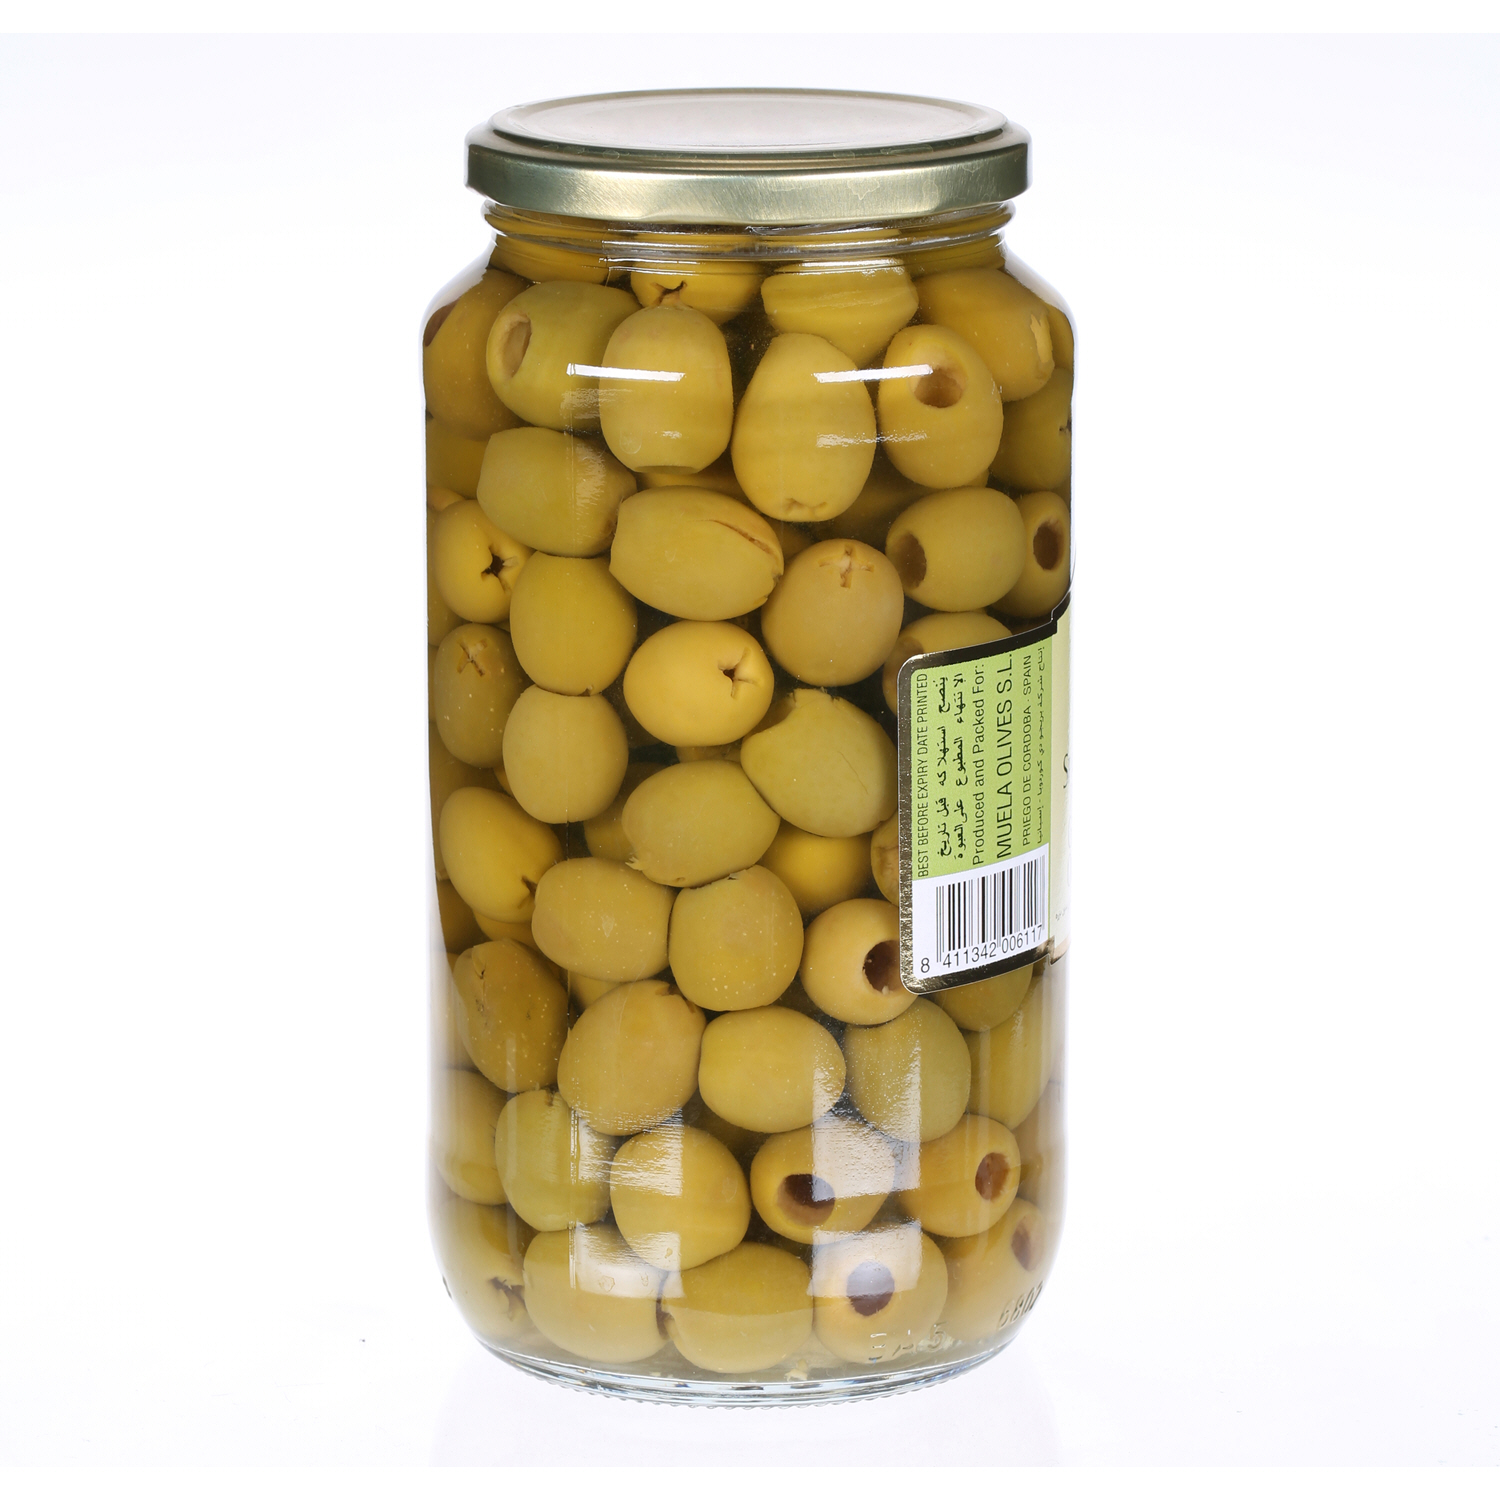 Cordoba Pitted Green Olives 450 g